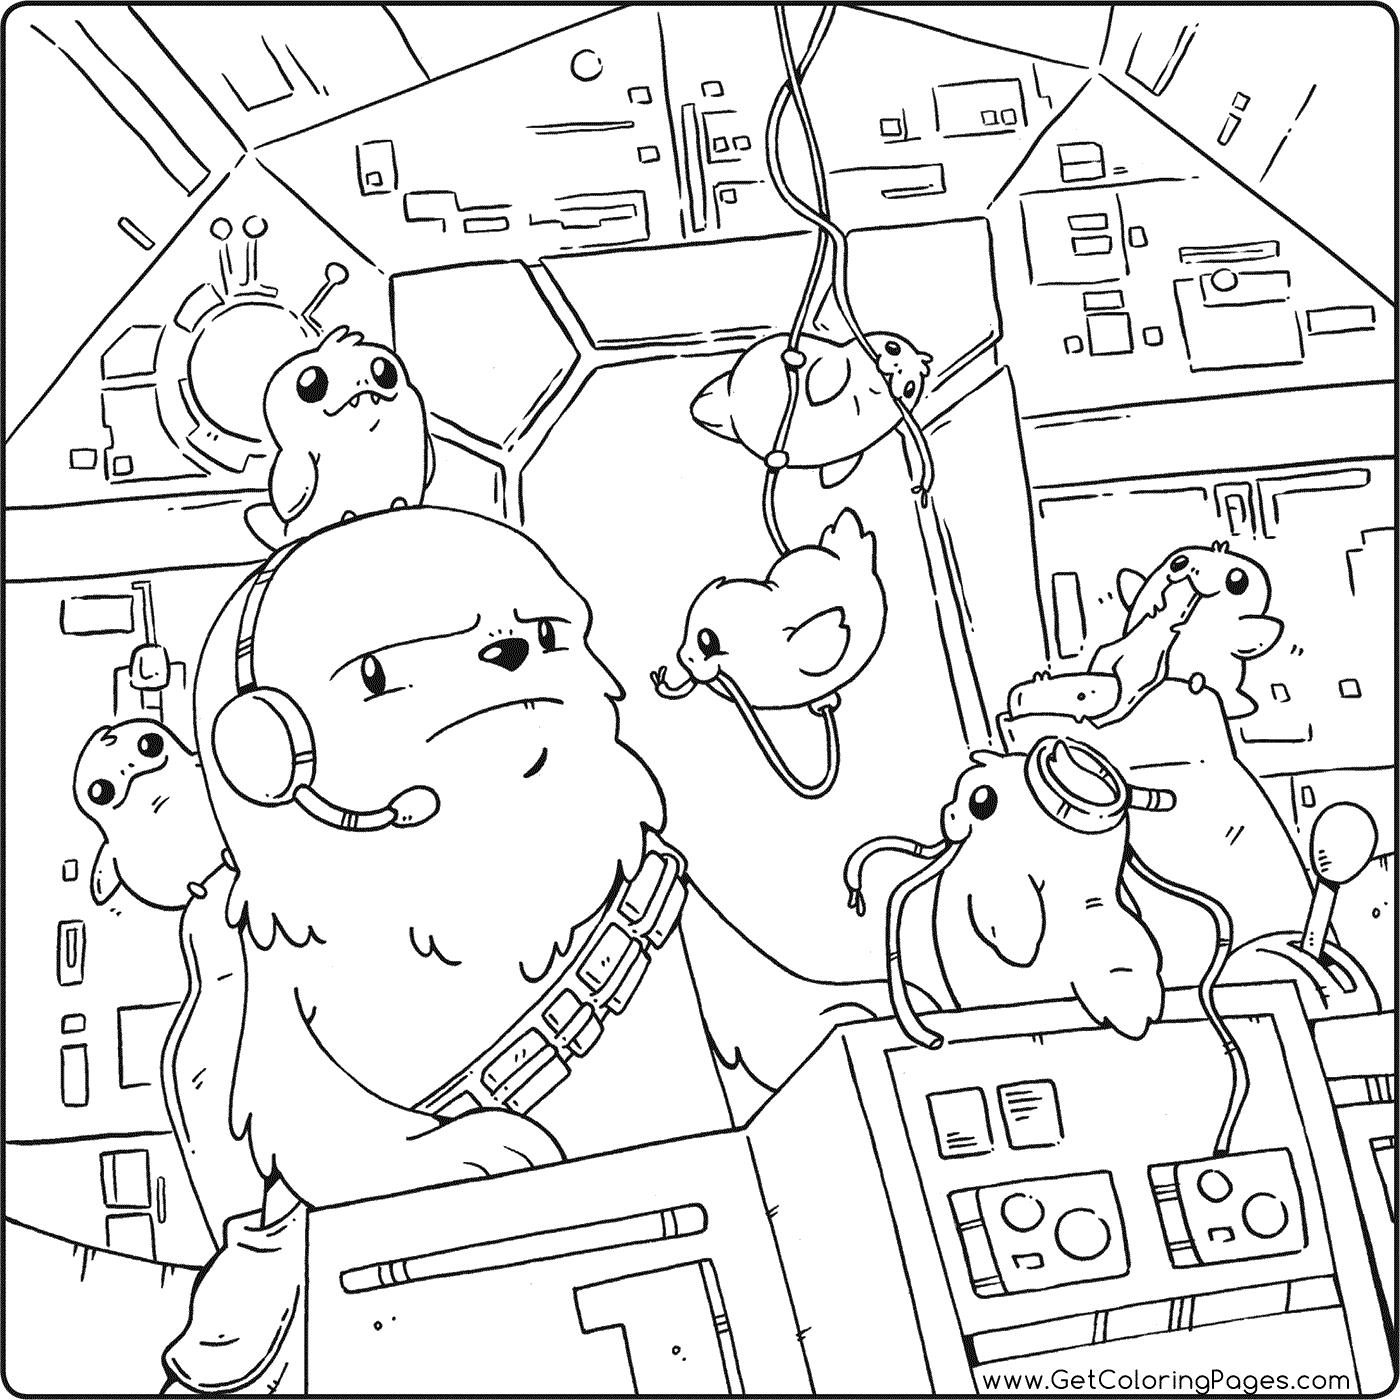 Porg & Chewie Coloring Pages - Get Coloring Pages